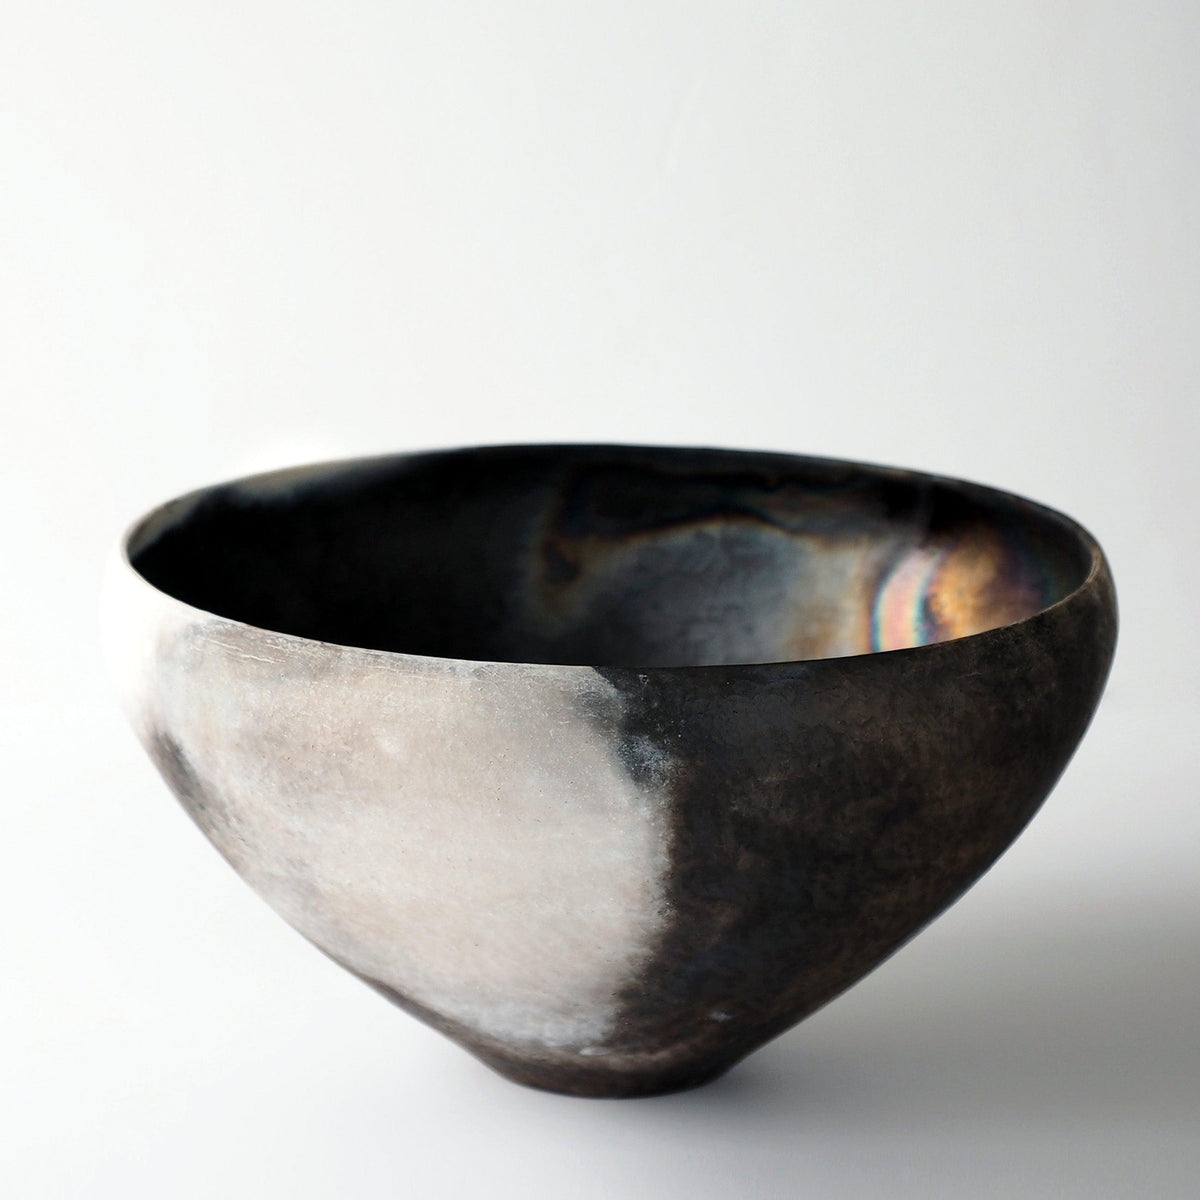 &#39;BJ17 Large Bowl&#39; by Bridget Johnson ceramics available at Padstow Gallery, Cornwall